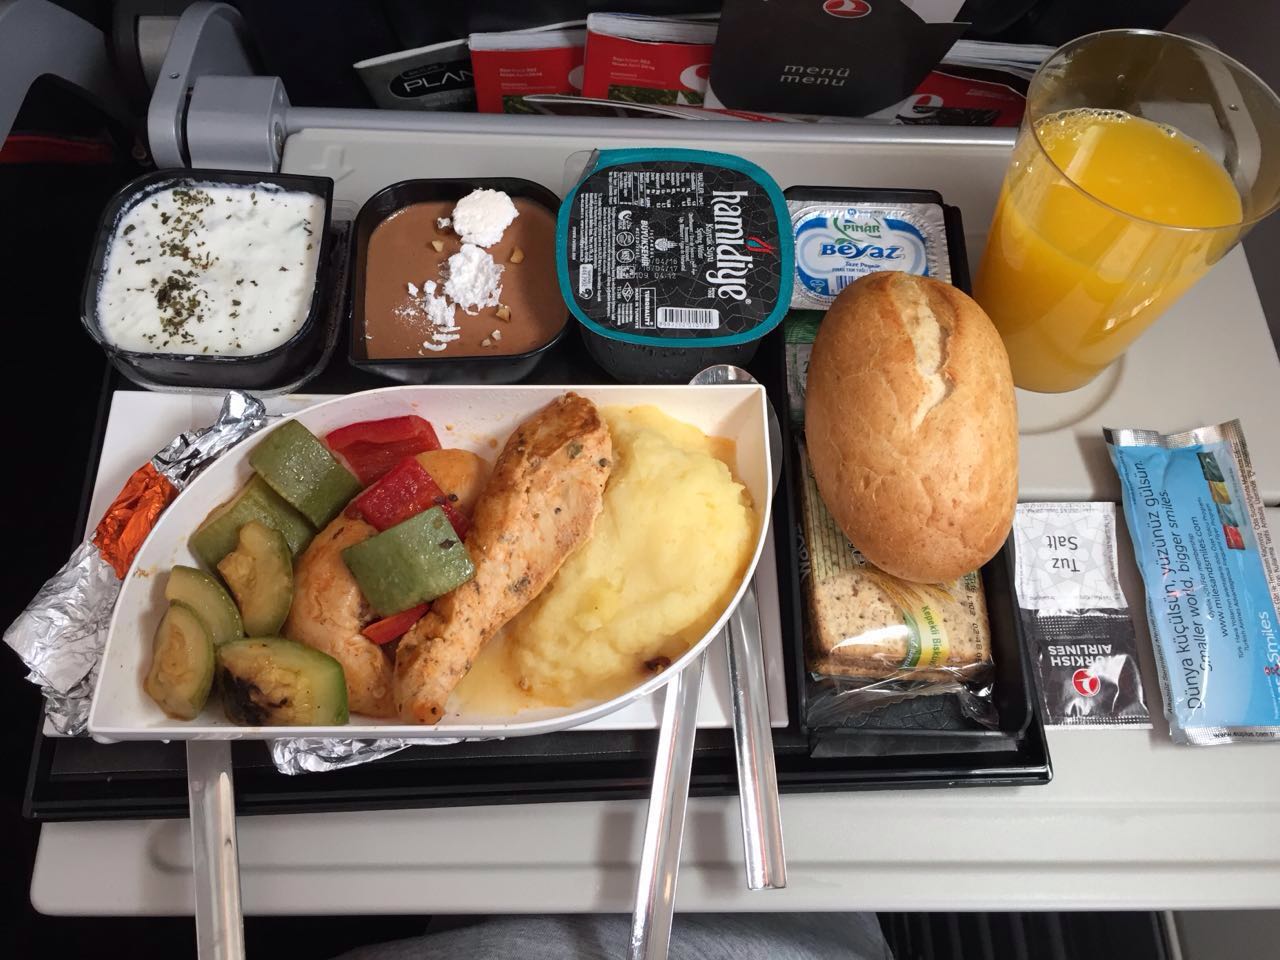 THY_Turkish-Airlines_Inflight-Meal_Economy-Class_Istanbul-Malaga_April-2016_003